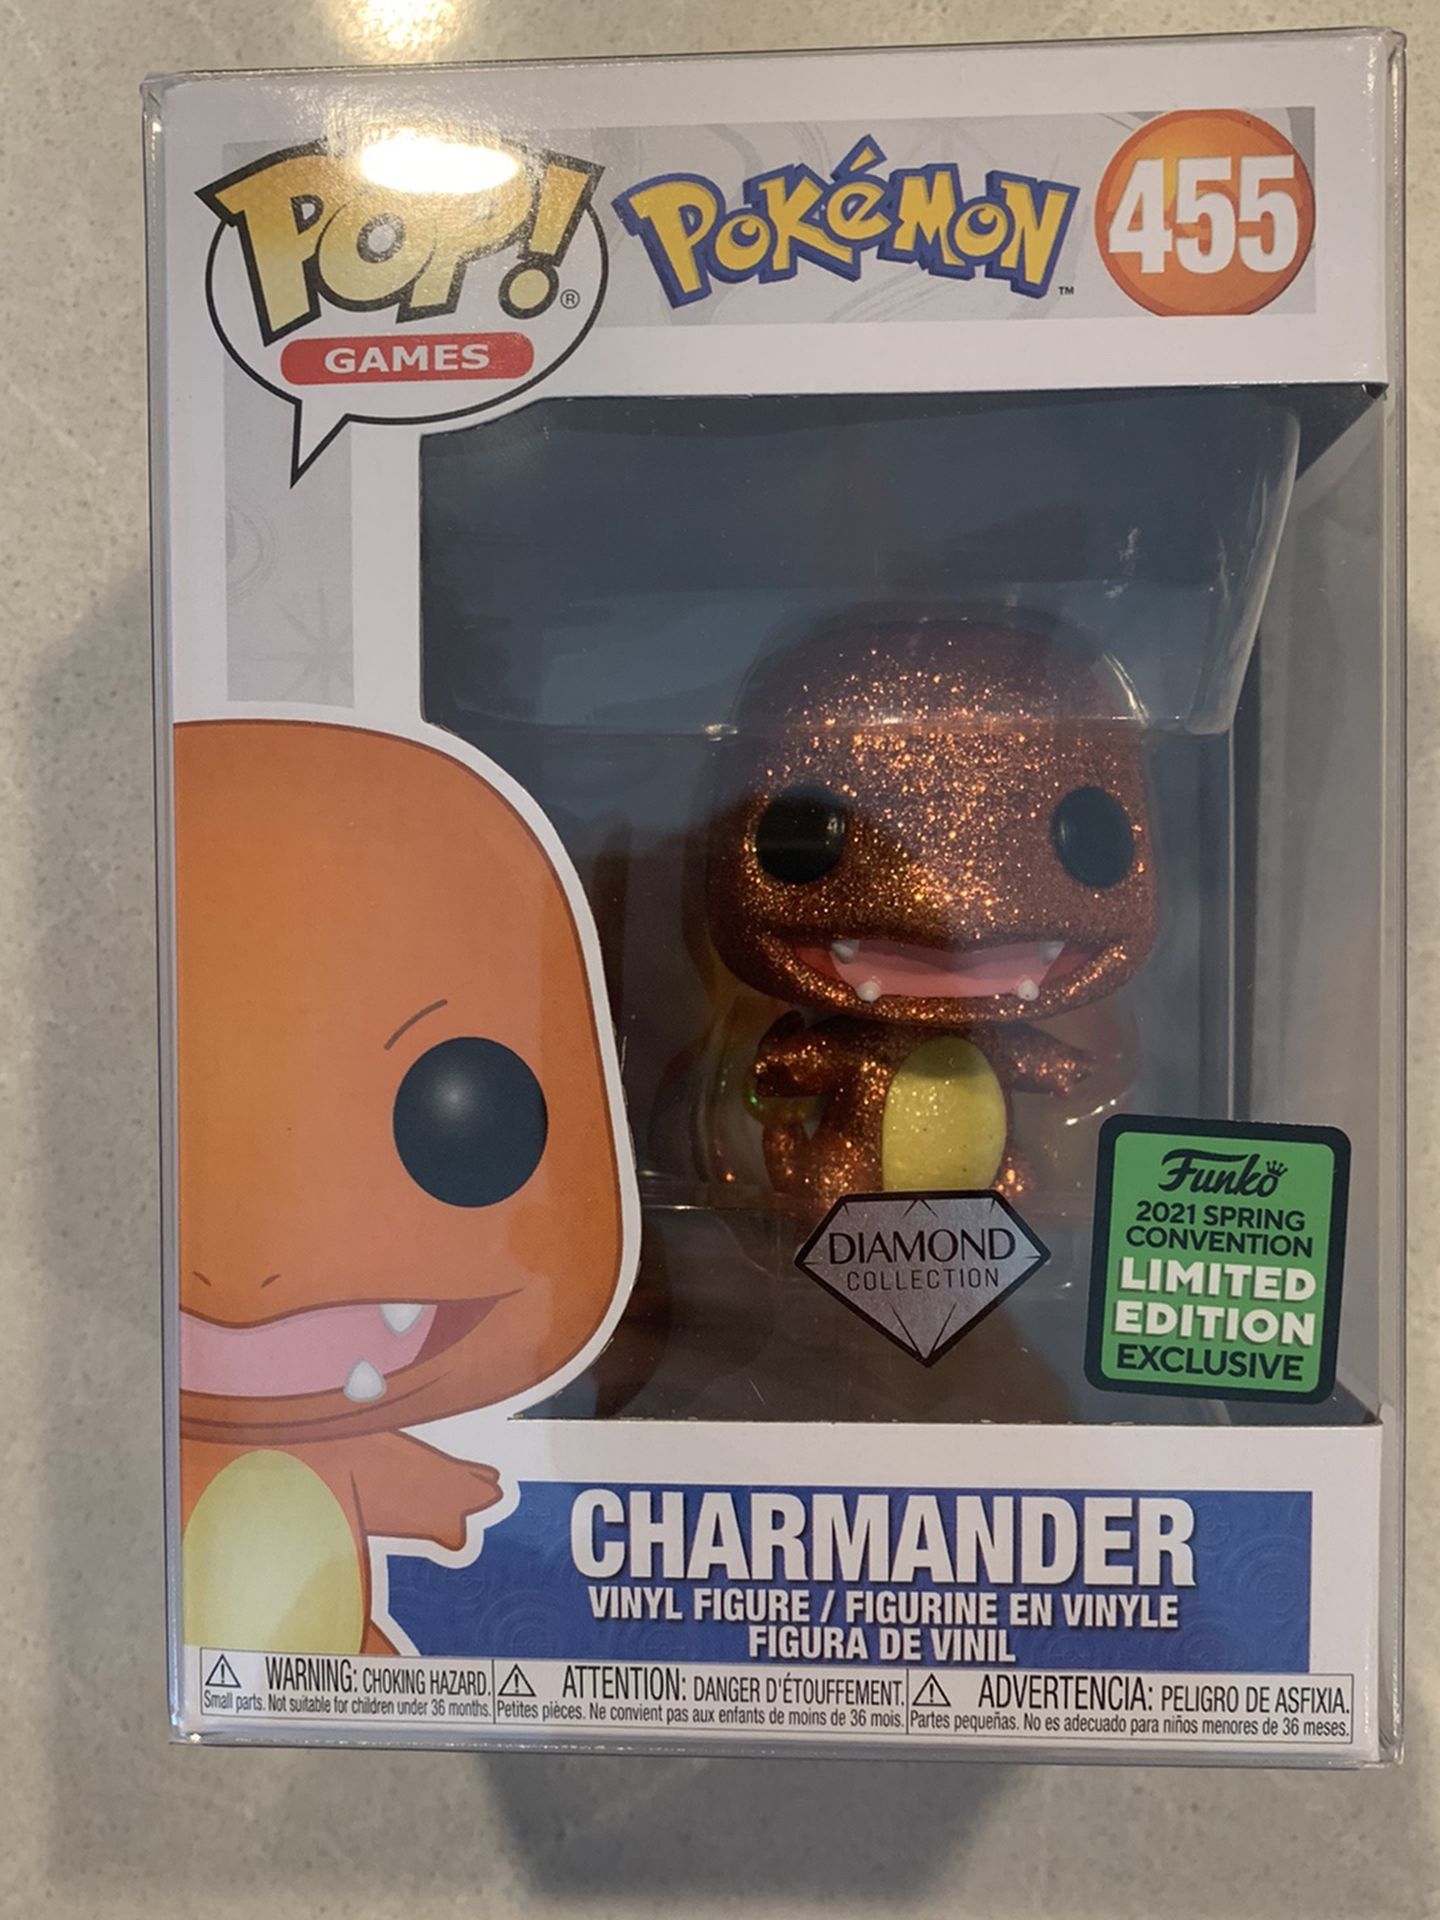 Diamond Charmander Funko Pop *MINT IN HAND* 2021 ECCC Spring Convention Target Exclusive Pokemon 455 with protector